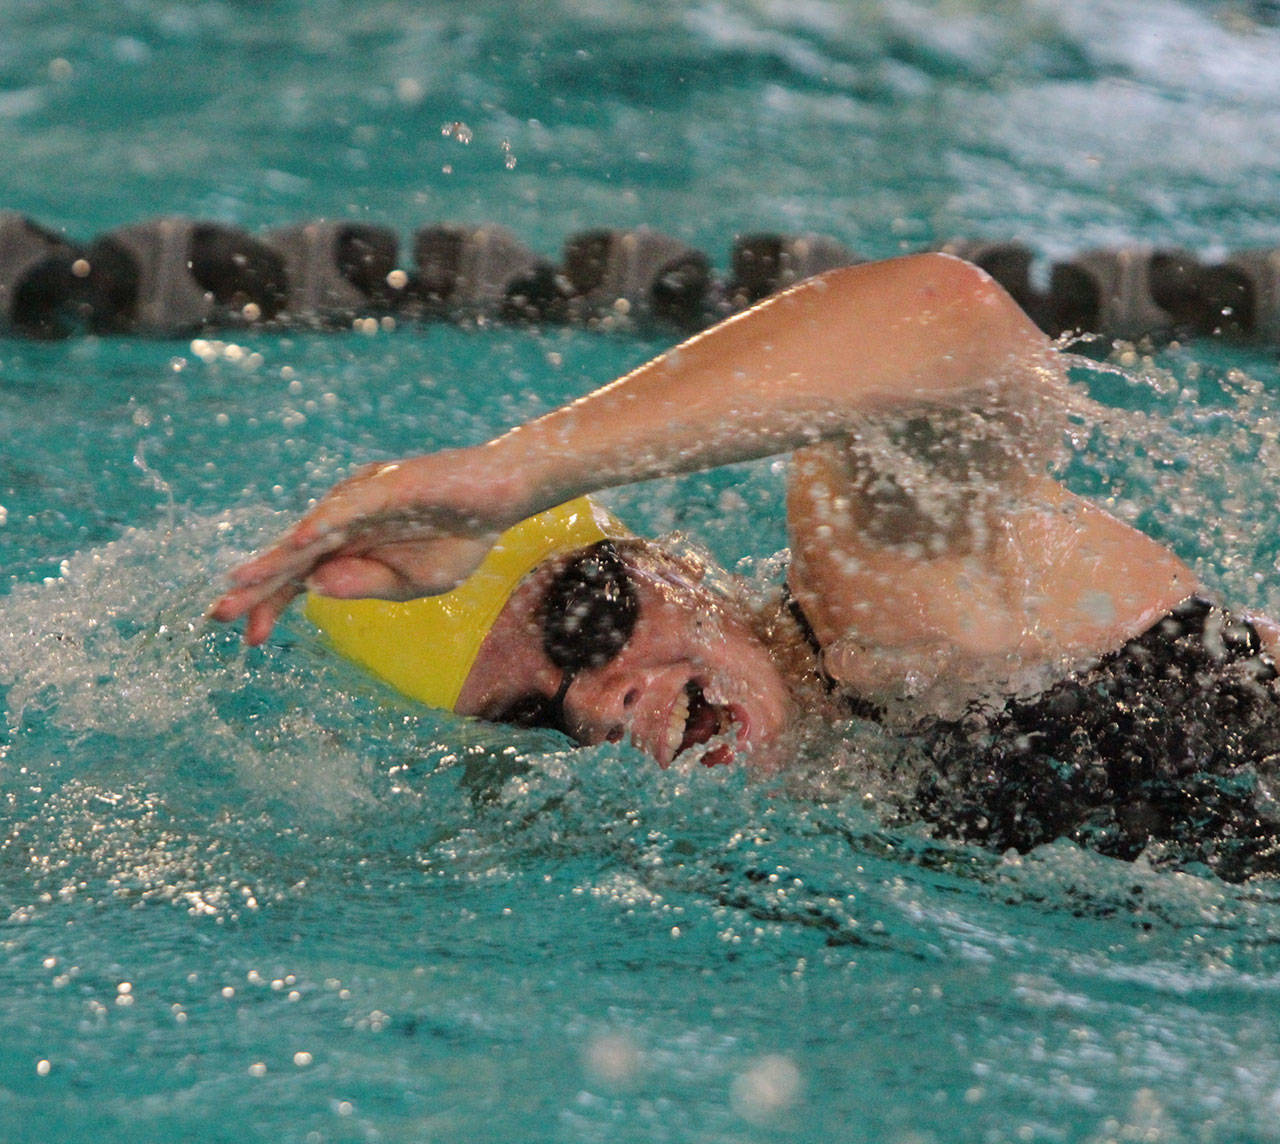 Laura Murphy swims the 100-yard freestyle against Holy Names Academy during HNA’s meet against Bainbridge last week at home. (Brian Kelly | Bainbridge Island Review)